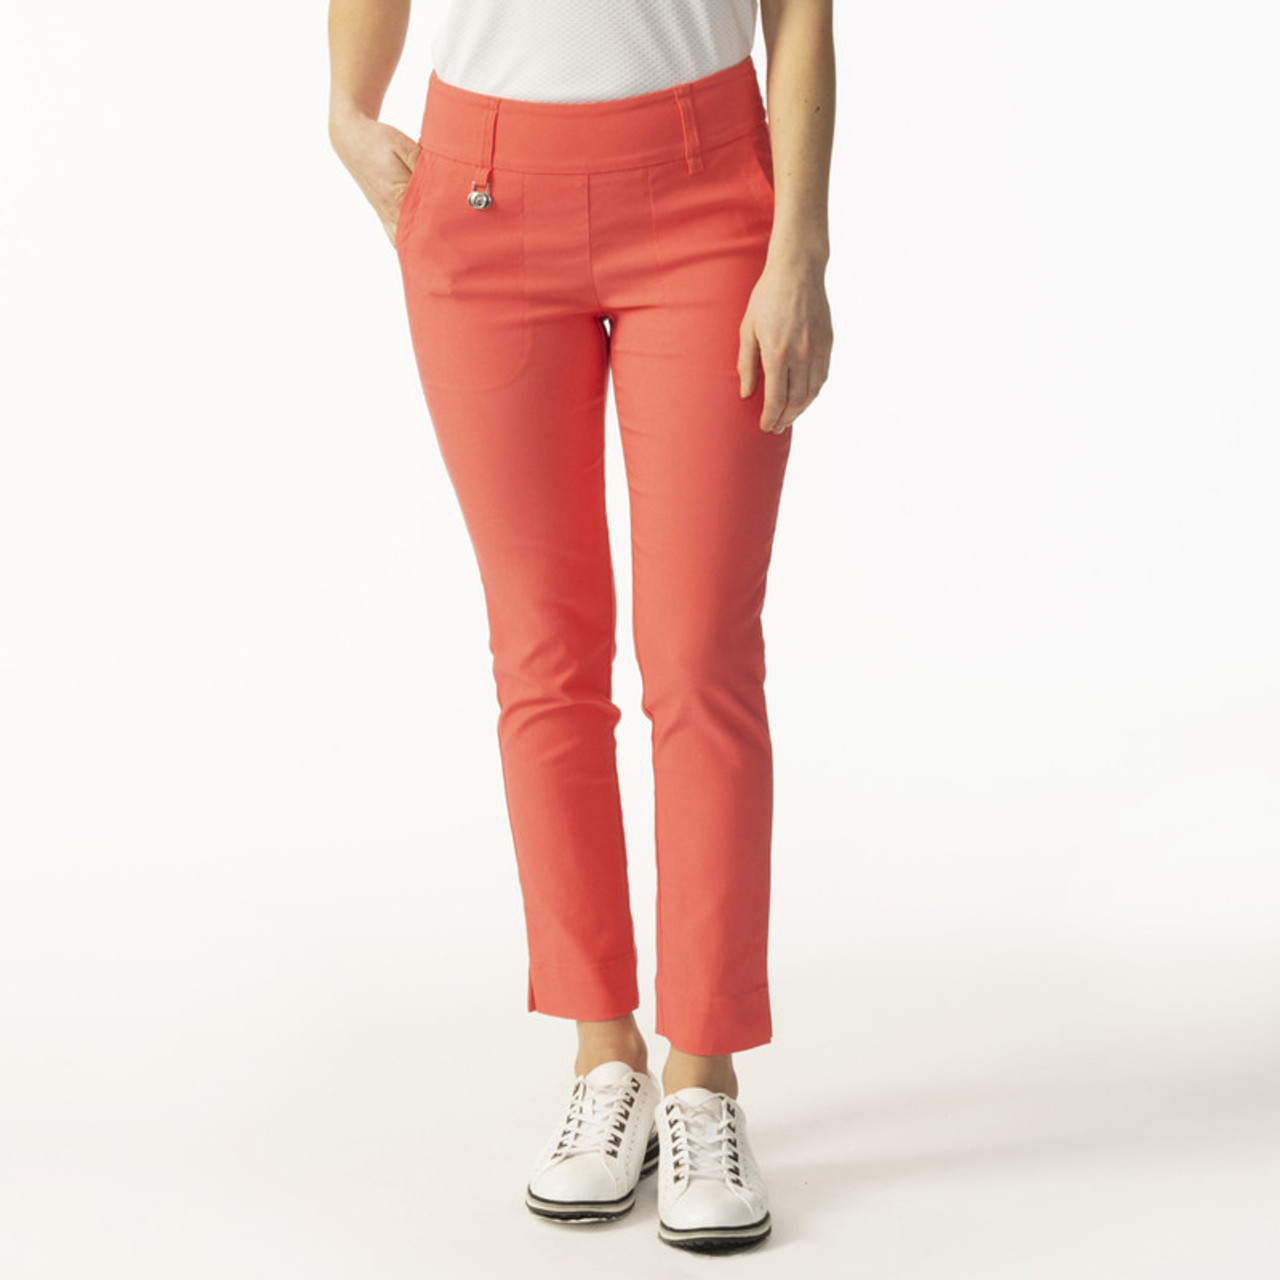 Daily Sports Magic Woman's High Water Pants - Coral